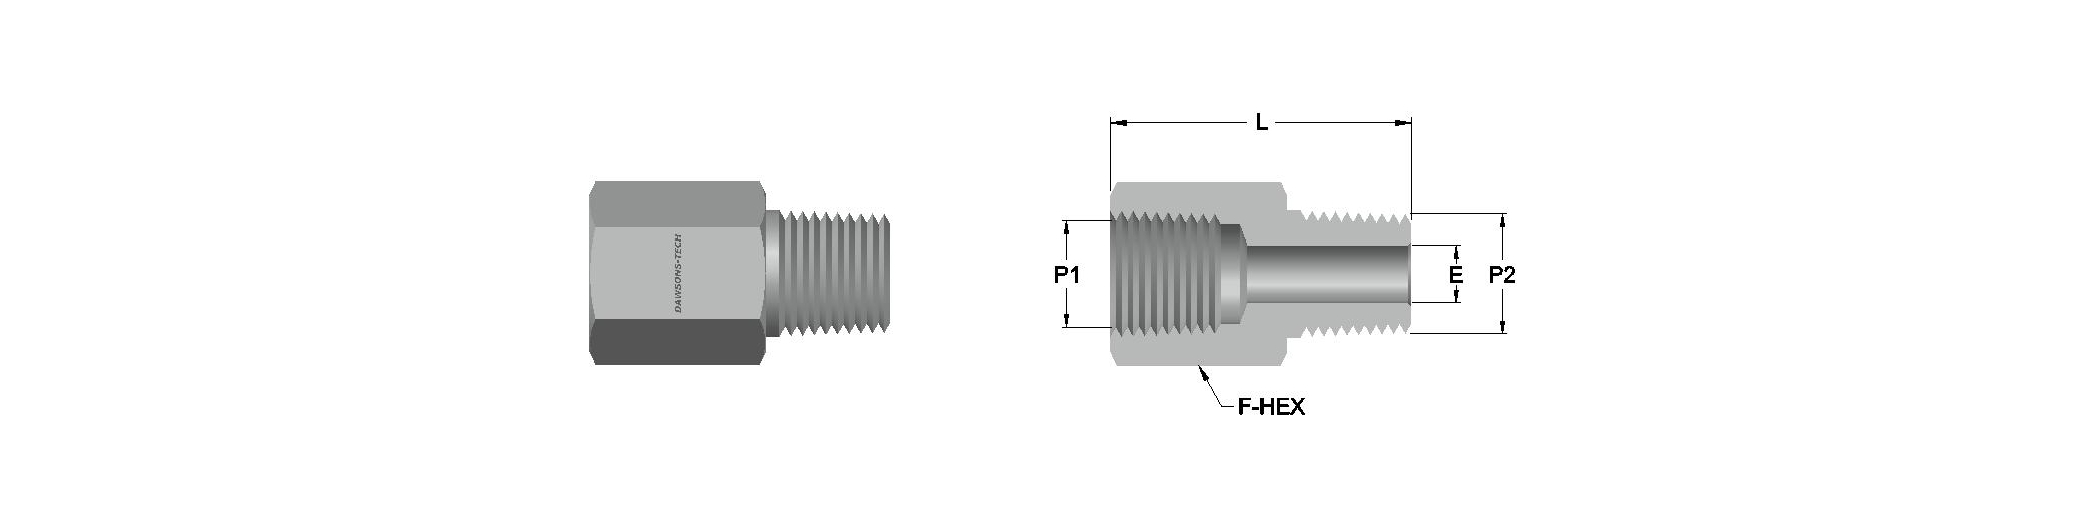 09 Adapter (NPT to BSPT) & (BSPT to NPT) Threads